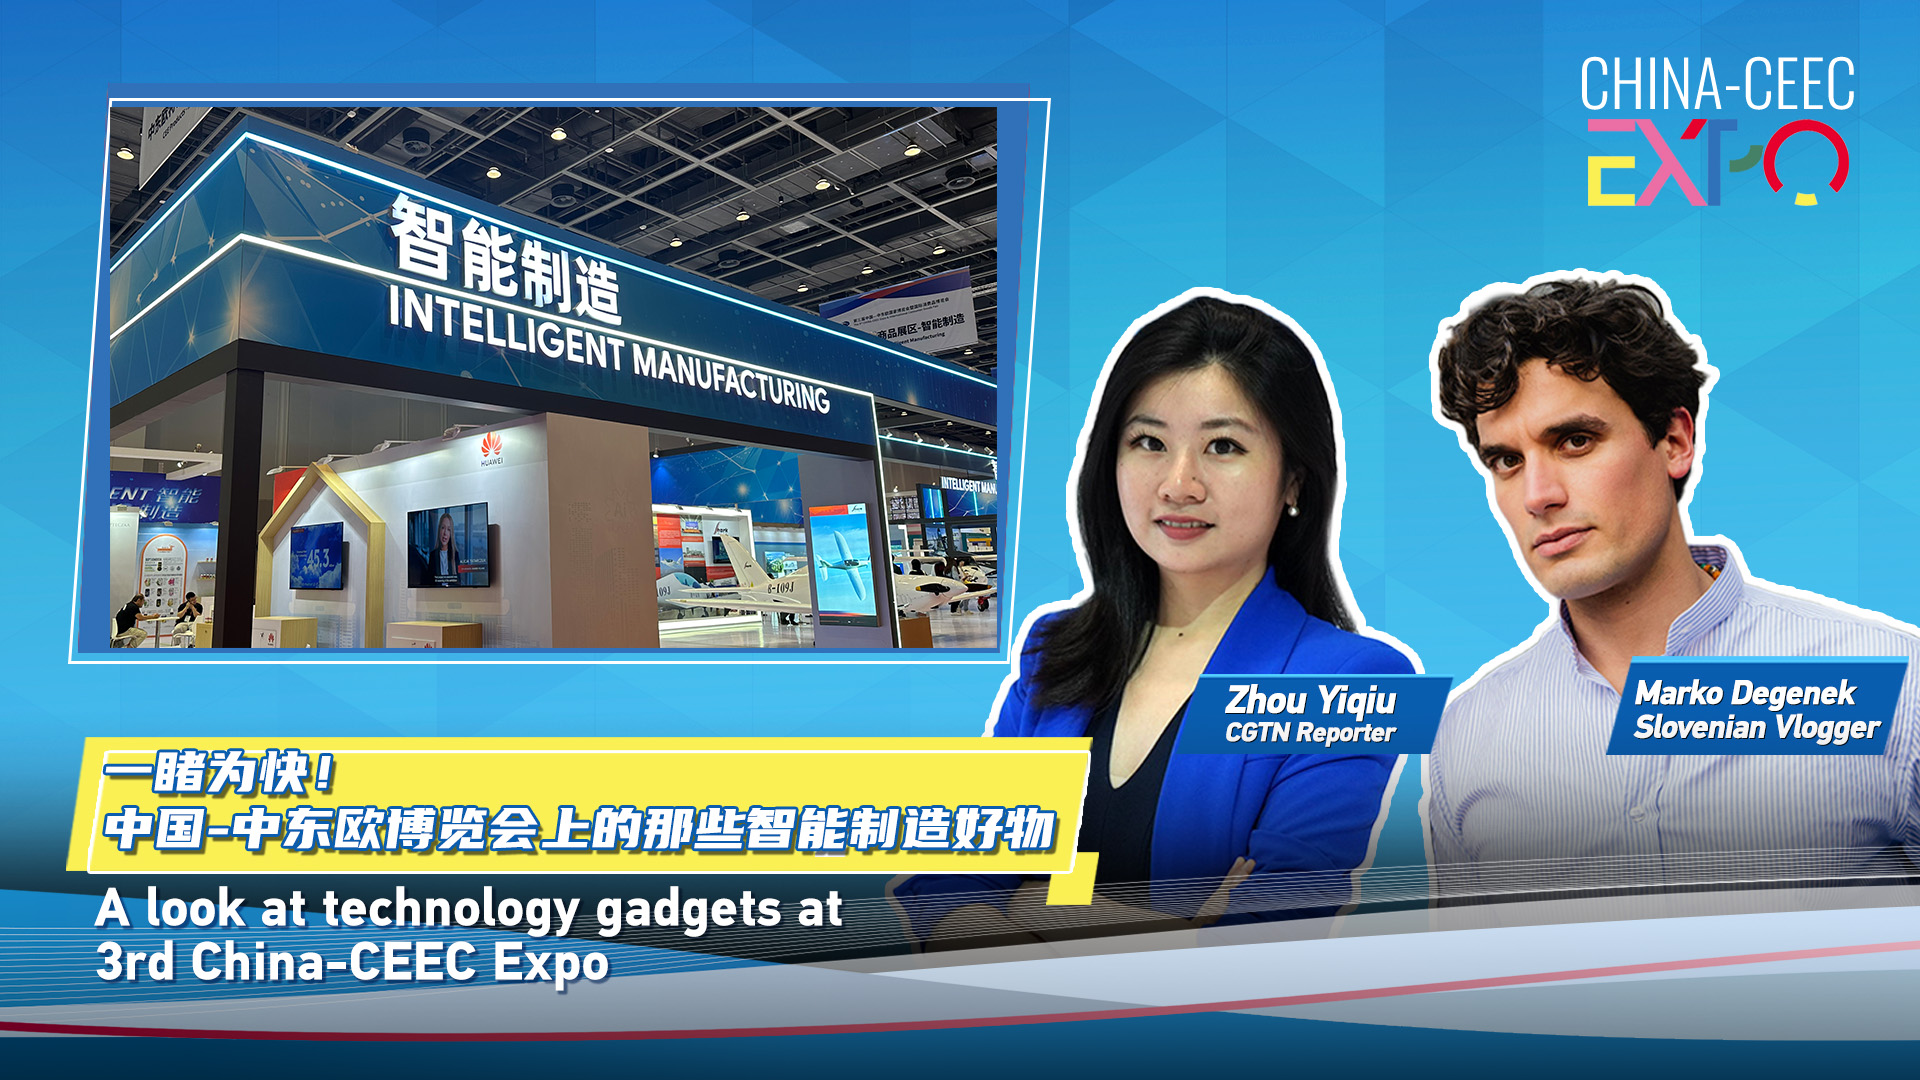 Live: A look at the technology gadgets at the 3rd China-CEEC Expo